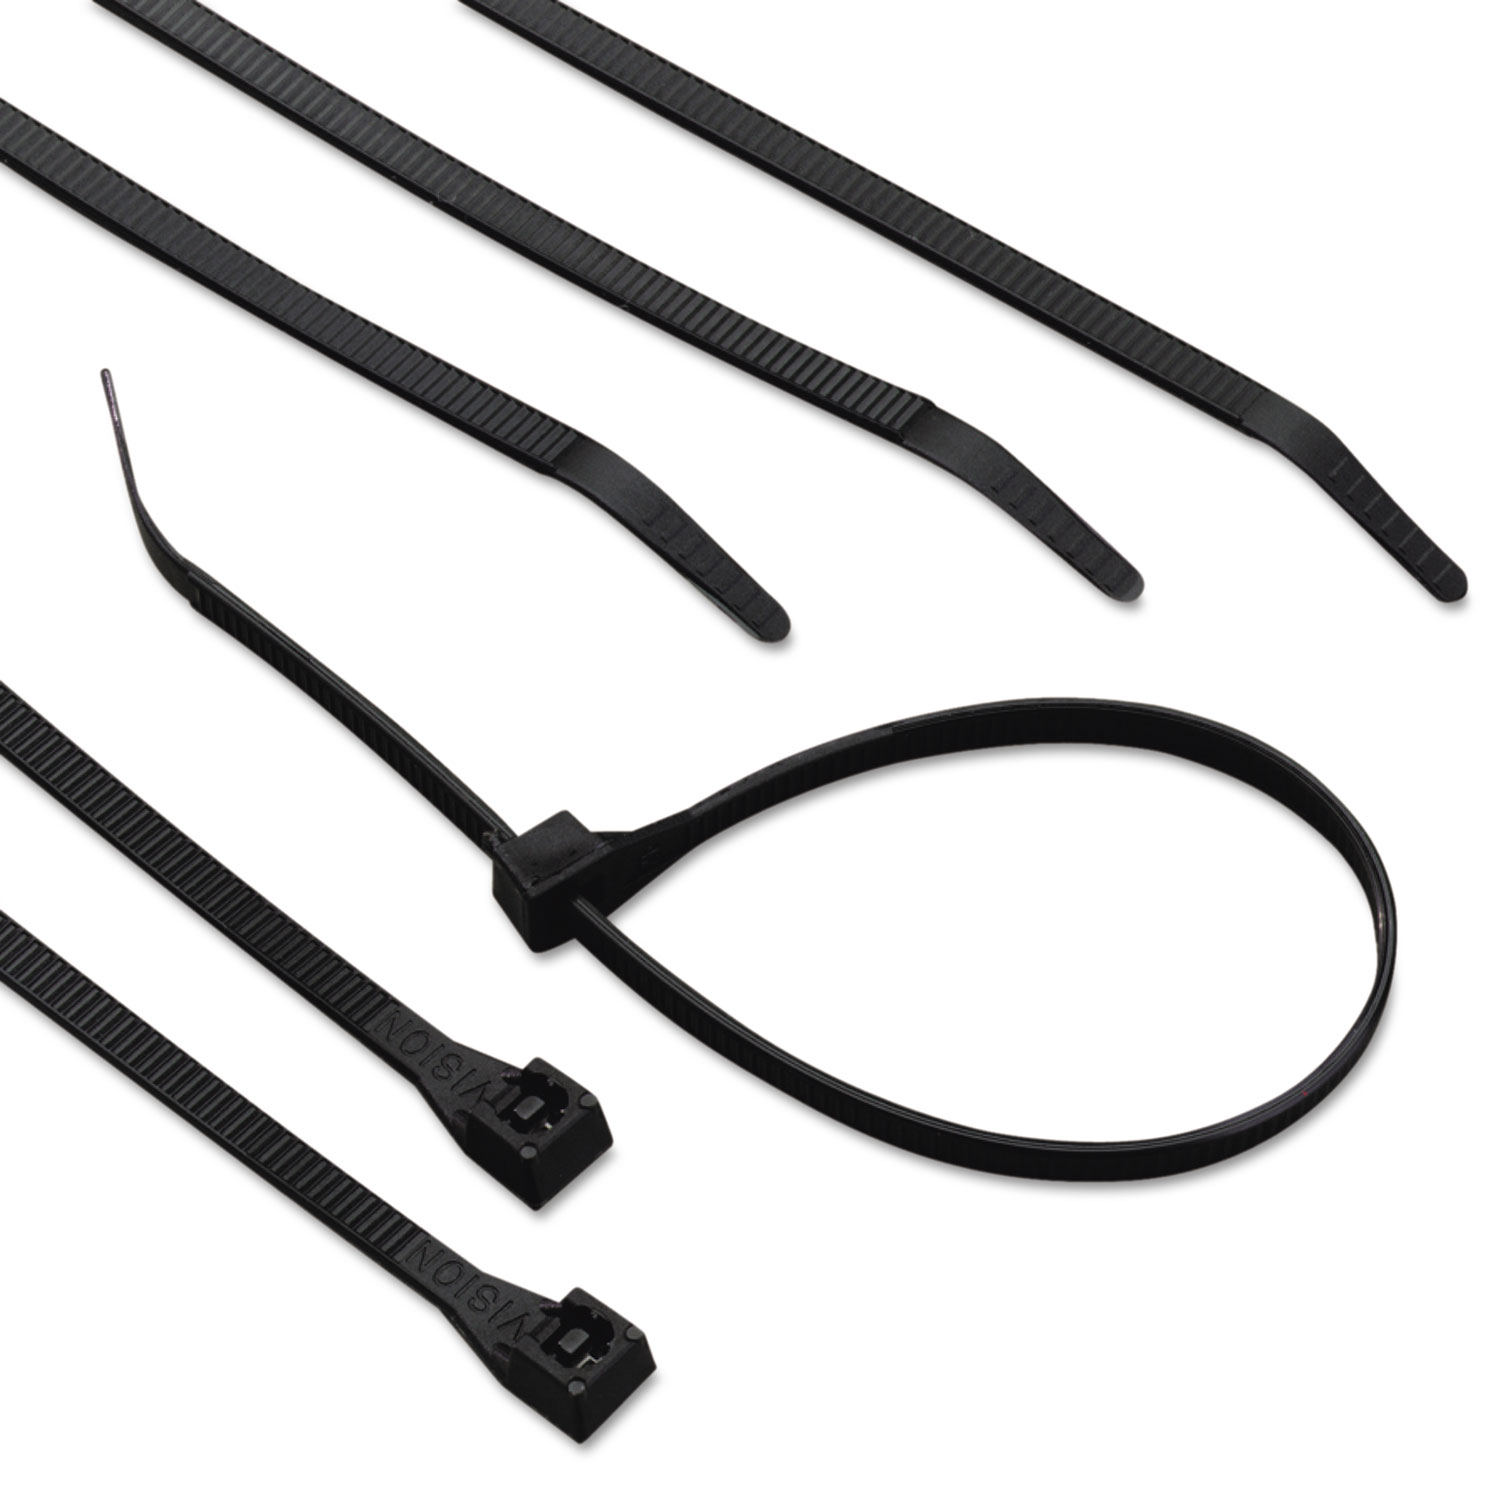 UVB Heavy-Duty Cable Ties, 24